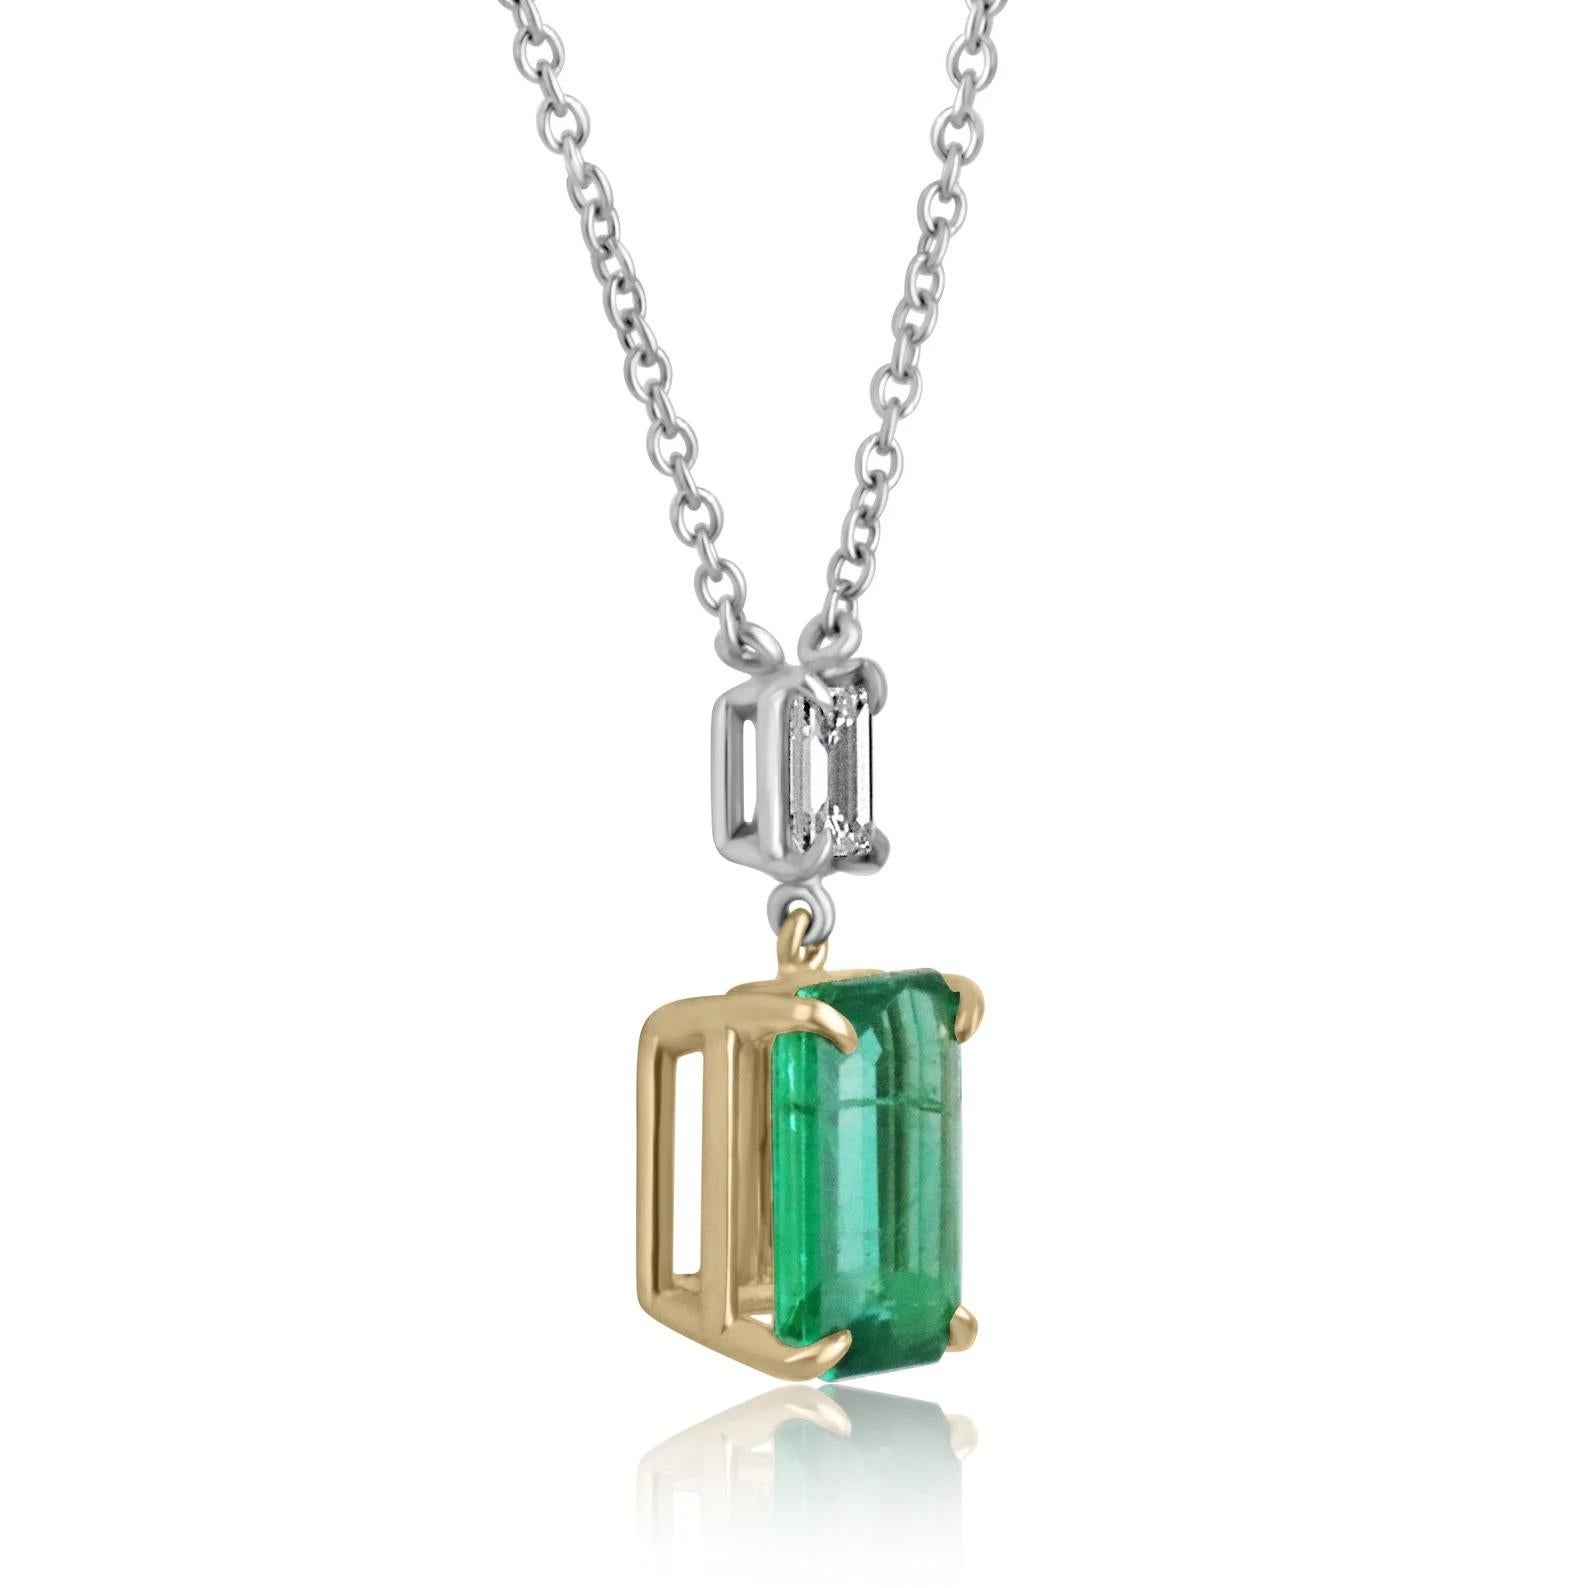 Take a look at this stunning rare vivid dark high-quality emerald and emerald cut diamond accent dangle necklace. The natural fine emerald features a vibrant strong dark green color and displays very good luster and eye clarity. Accented at the top,